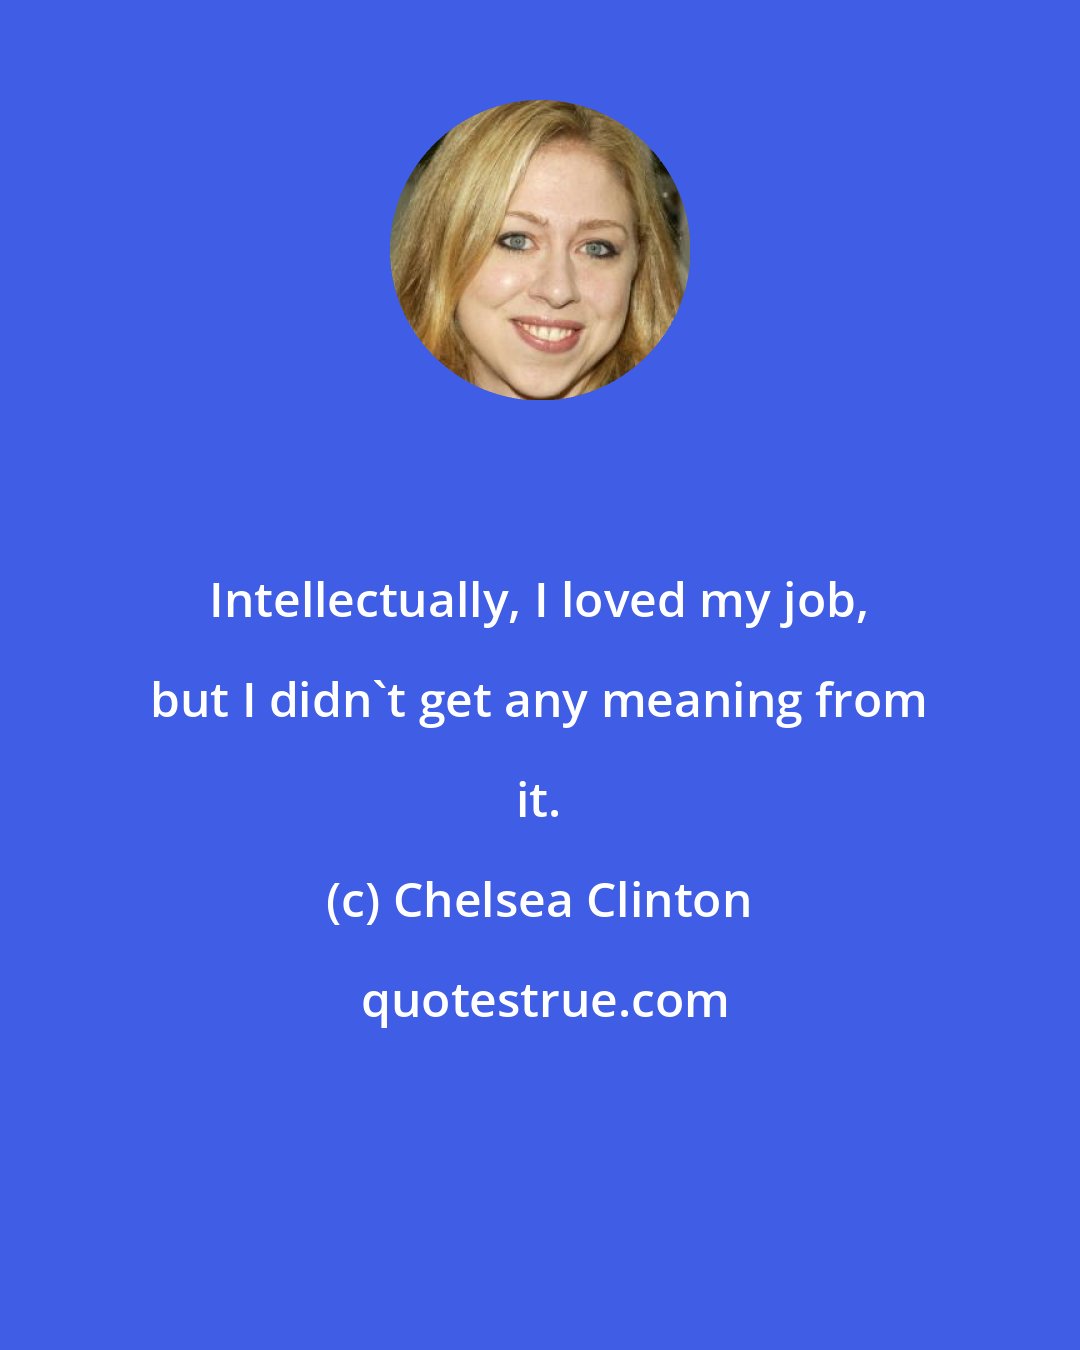 Chelsea Clinton: Intellectually, I loved my job, but I didn't get any meaning from it.